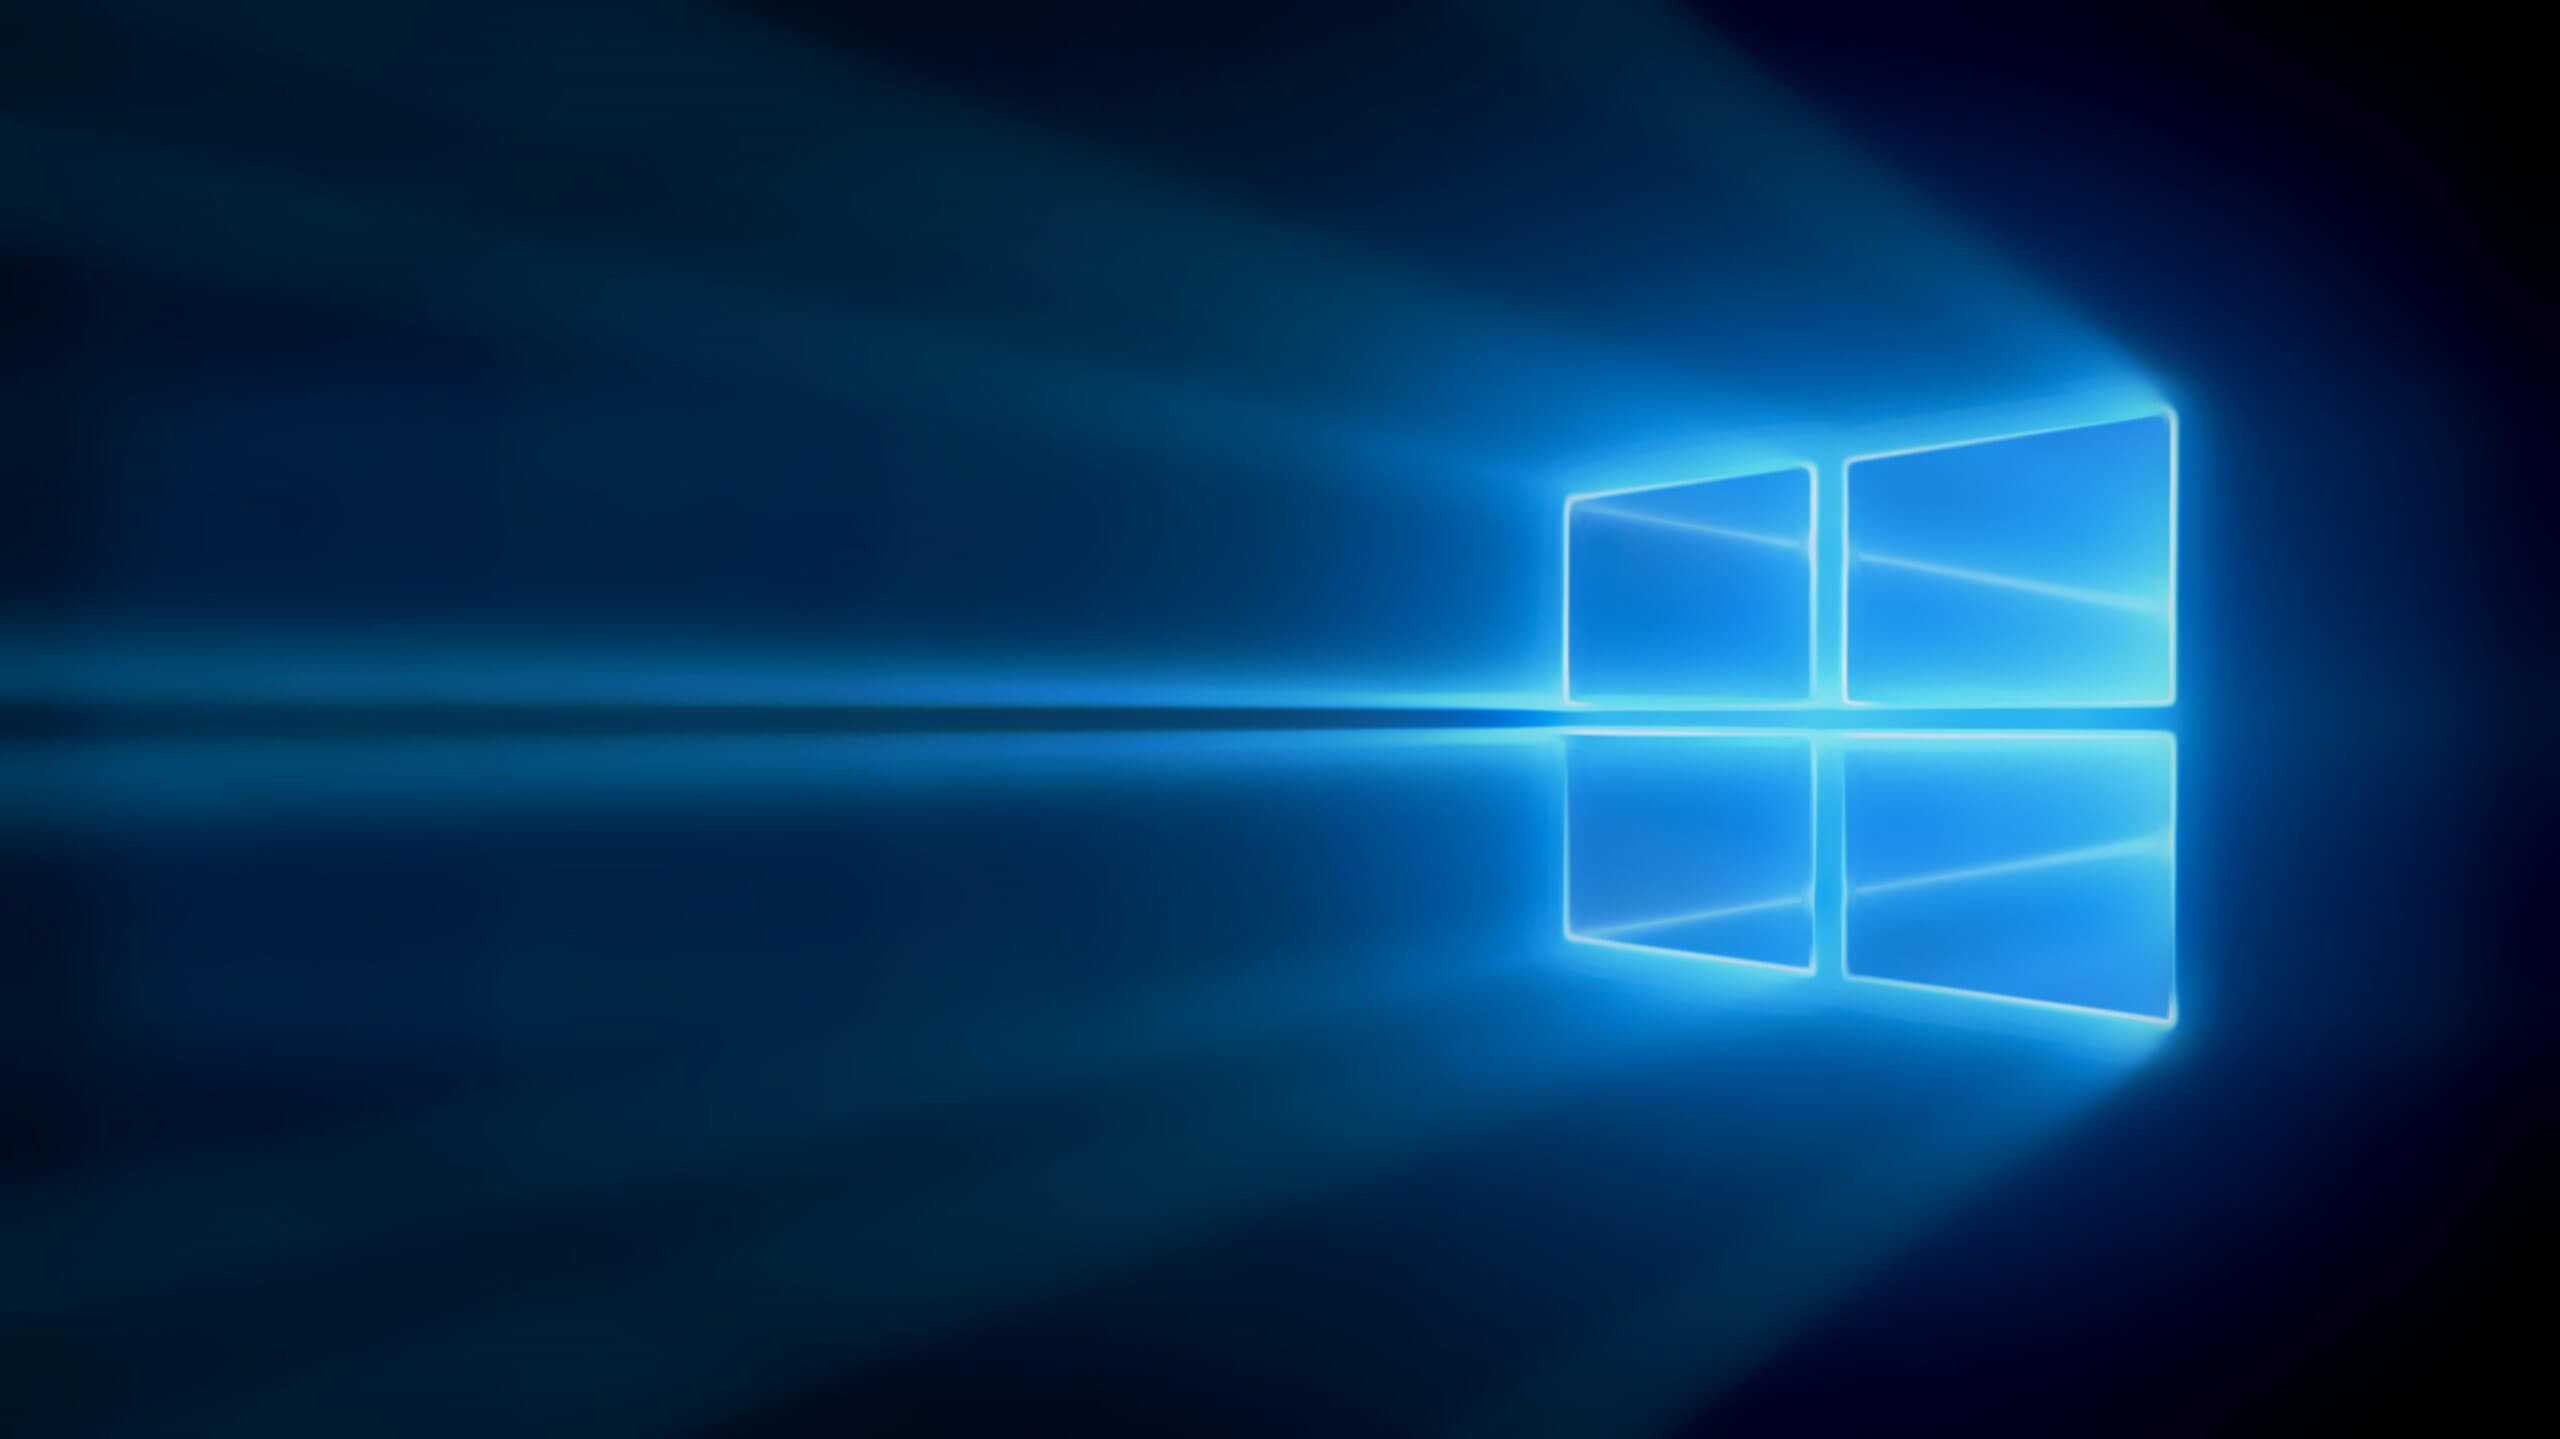 Microsoft releases Windows 10 test build previewing a ton of new features